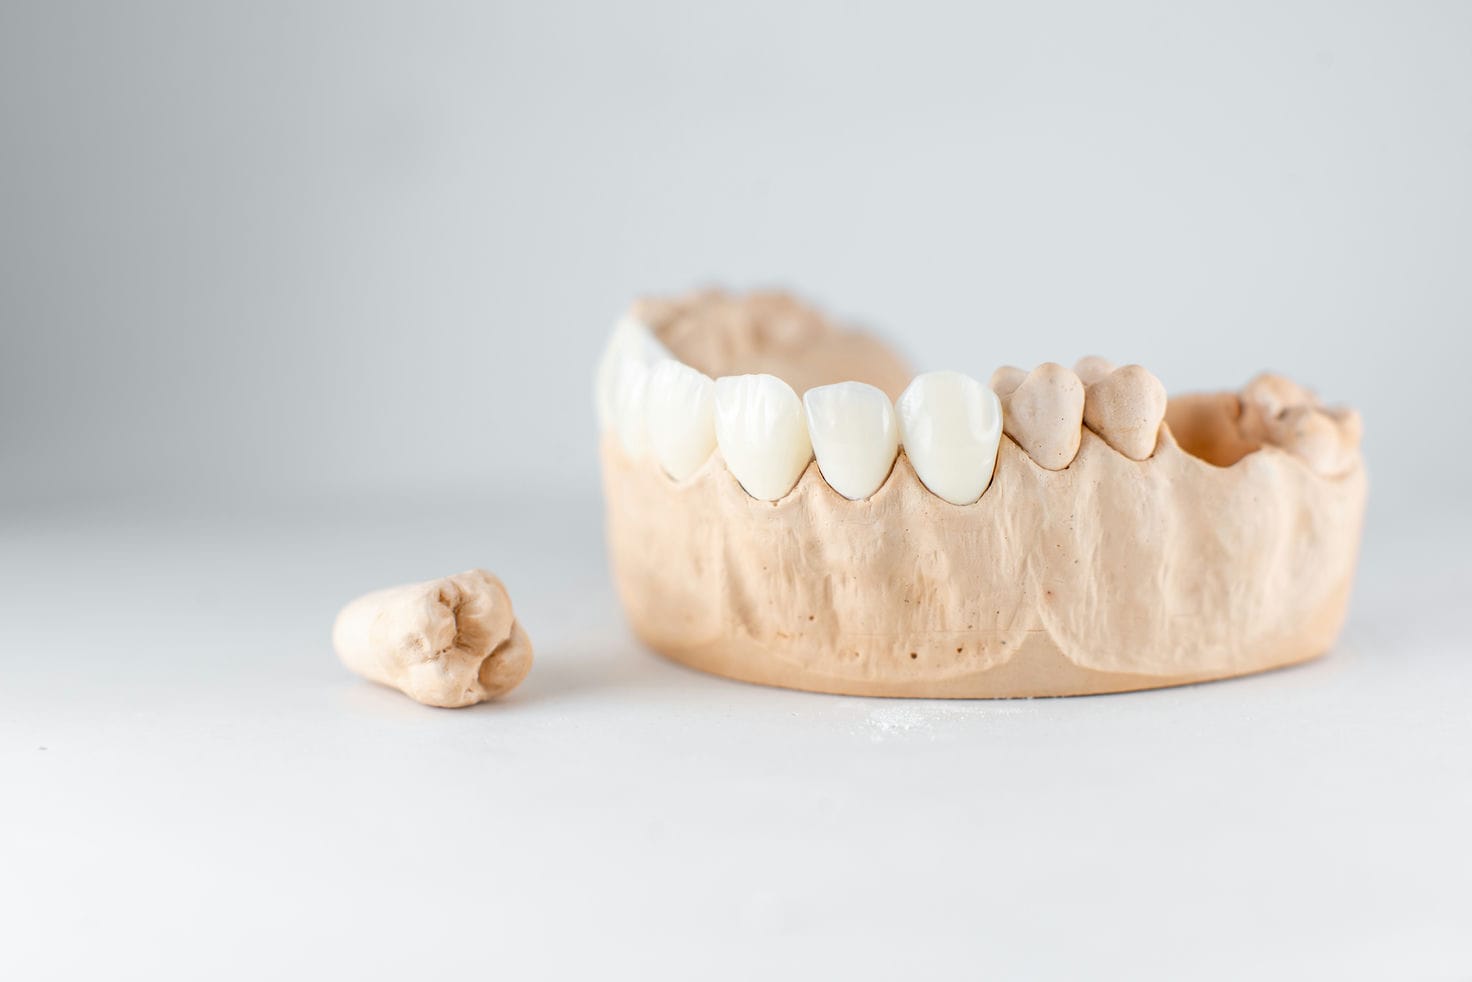 model of artificial jaw and tooth on the white bac 2021 09 01 14 47 45 utc 1 c